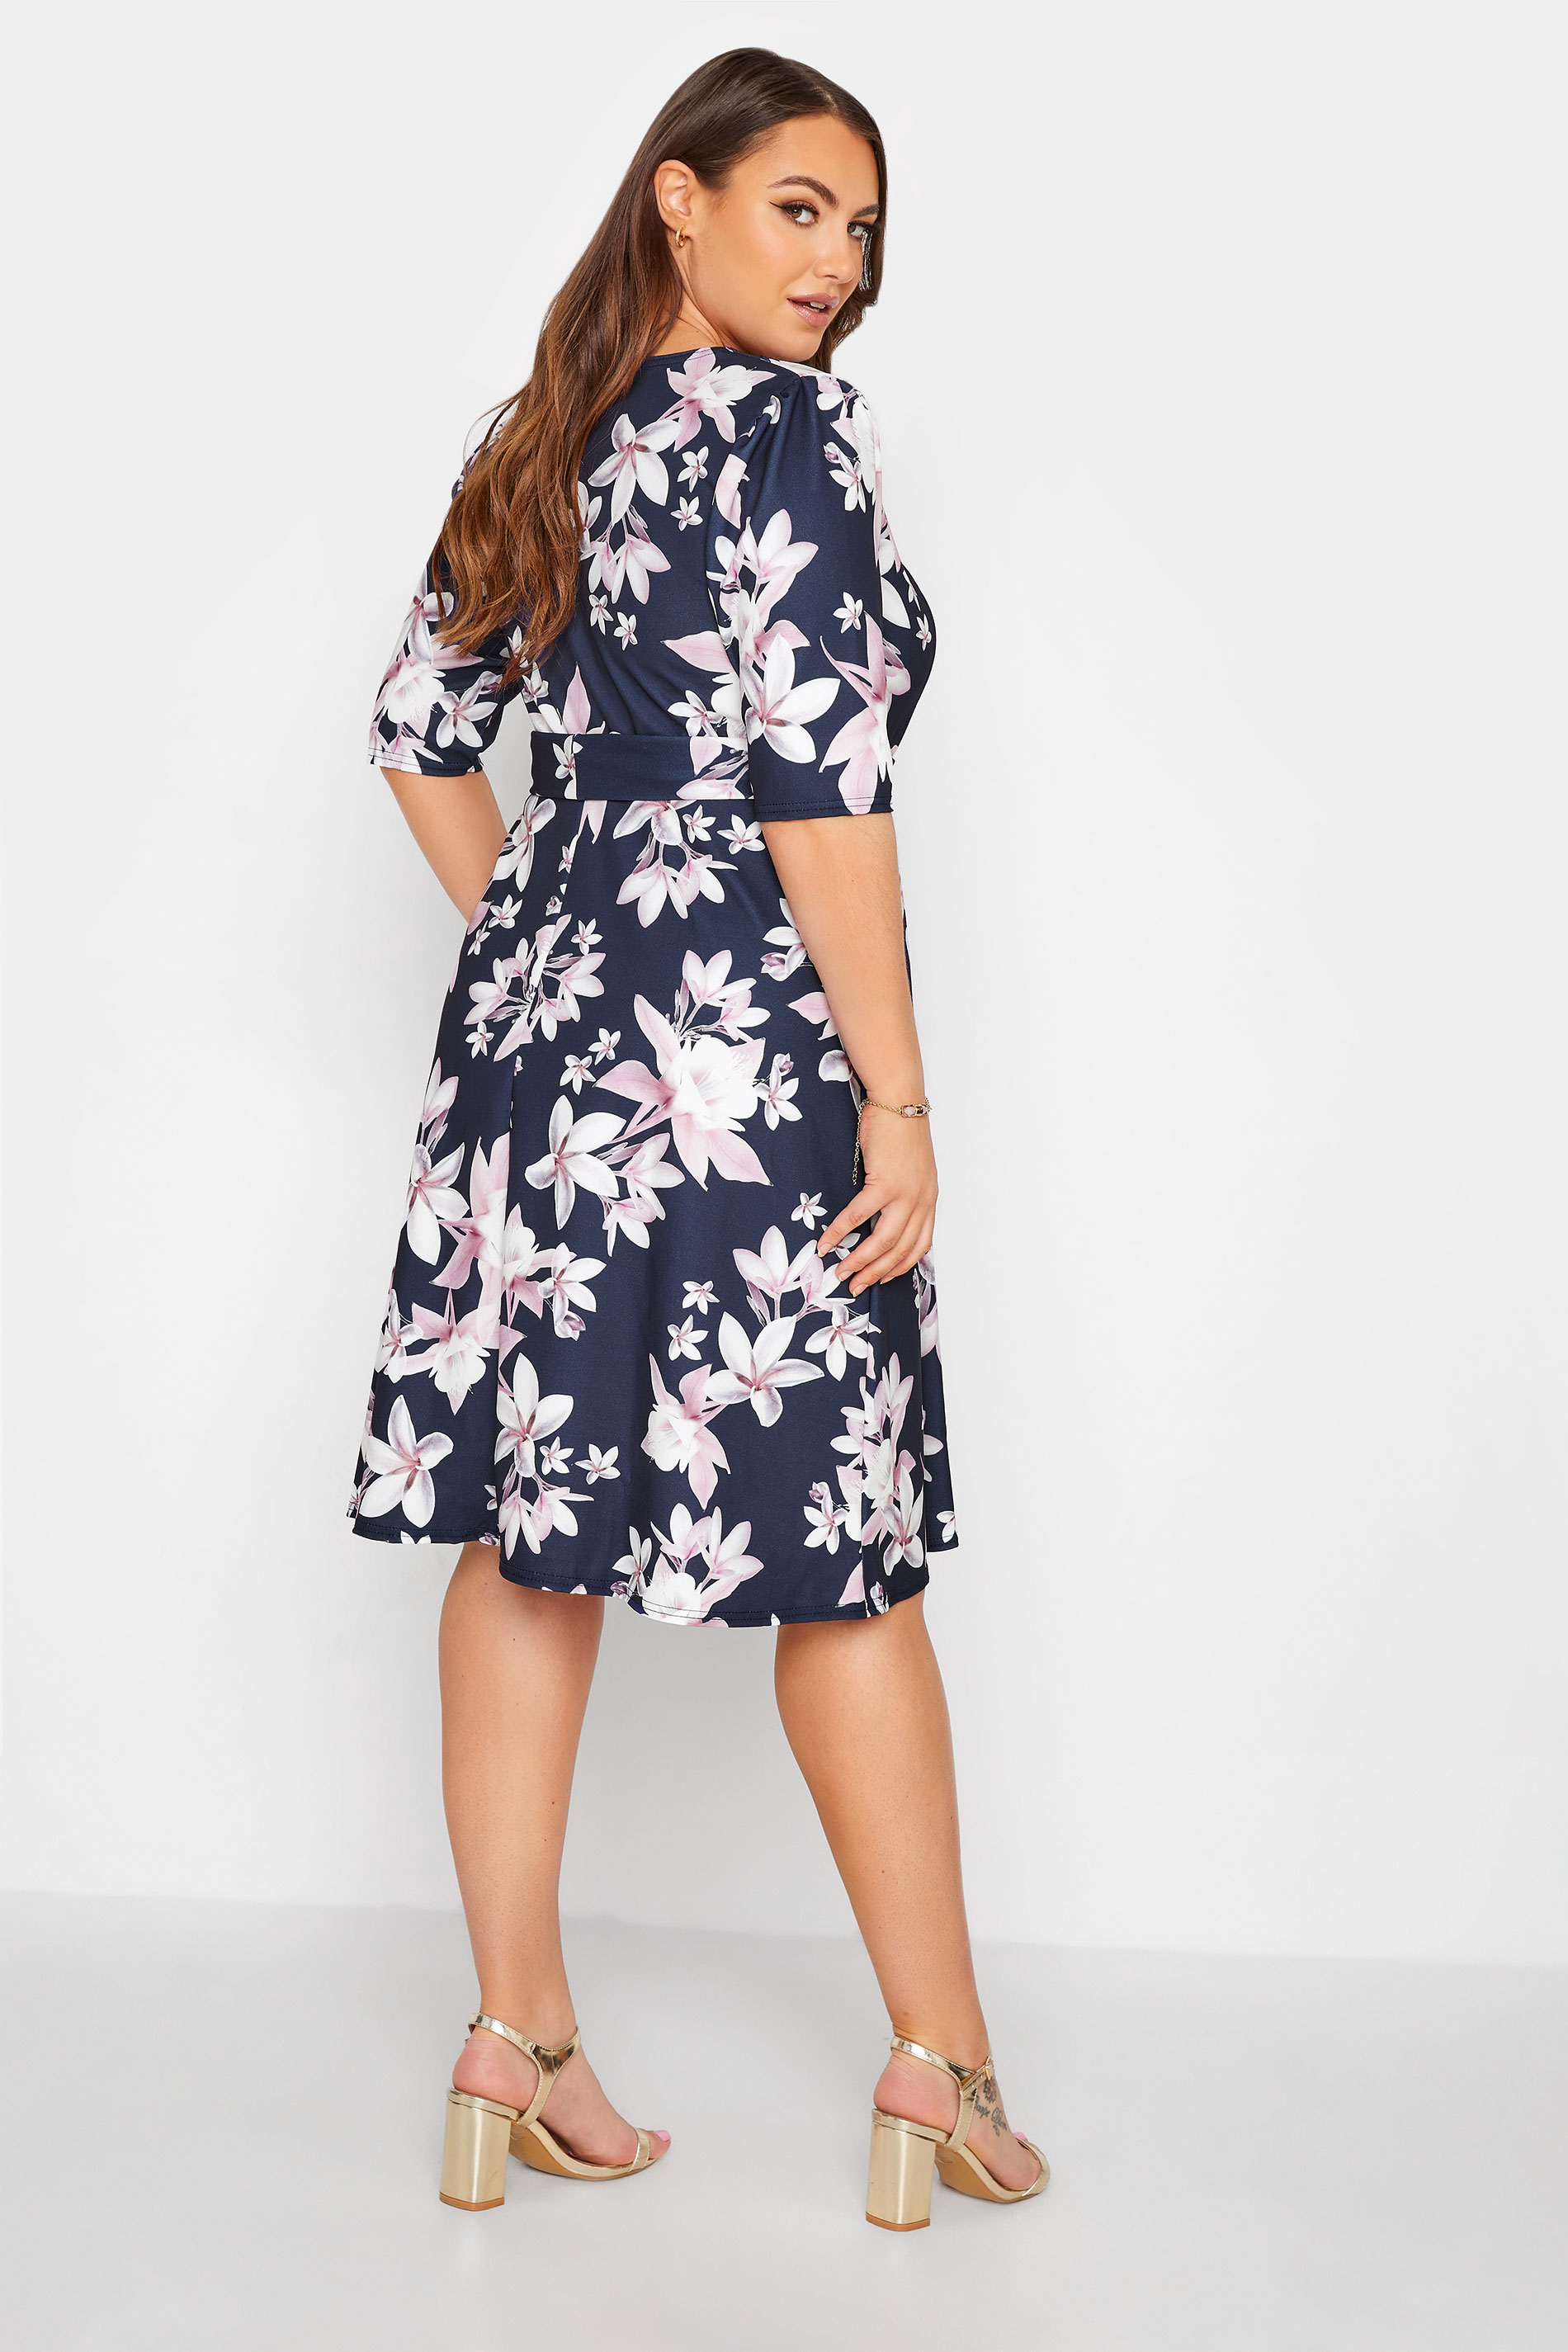 Robes Grande Taille Grande taille  Robes Imprimé Floral | YOURS LONDON - Robe Bleue Marine Floral Manches Courtes - XM72524